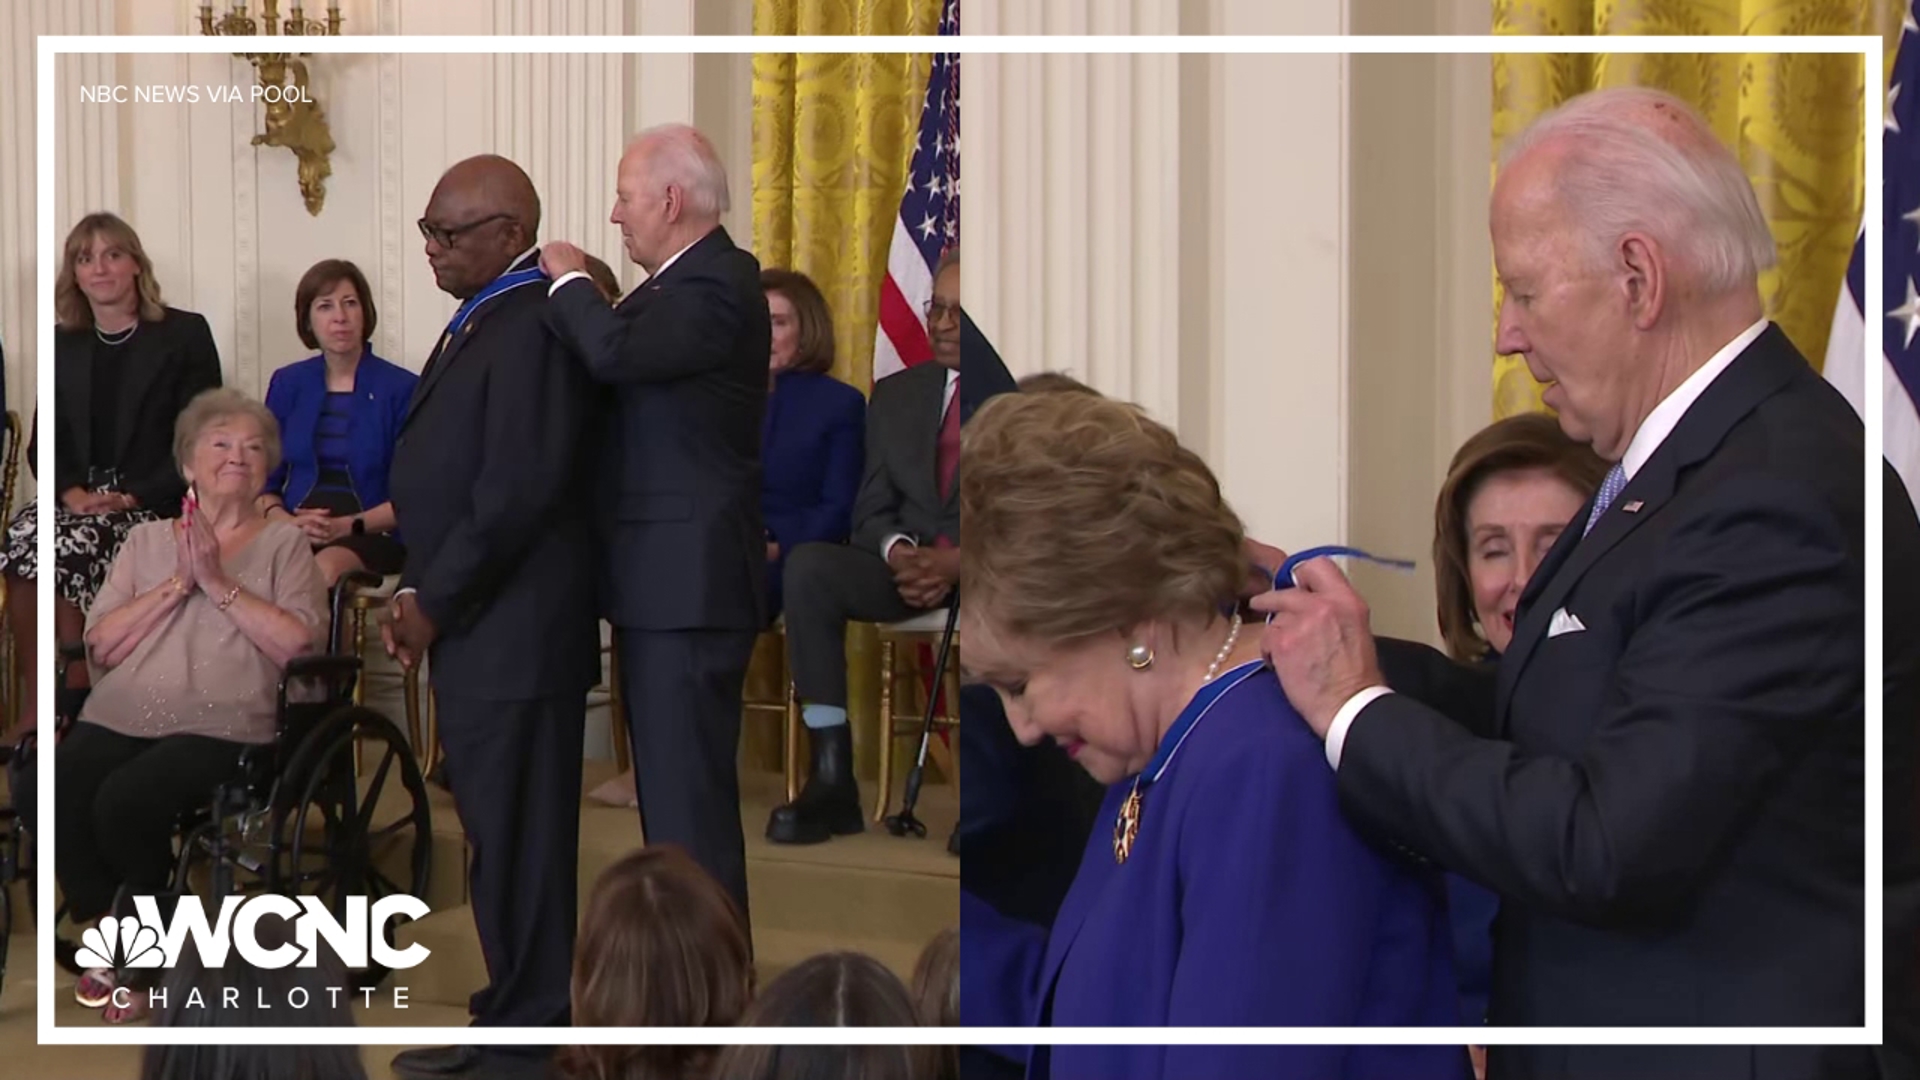 Elizabeth Dole and Rep. James E. Clyburn were recognized for their civic service.